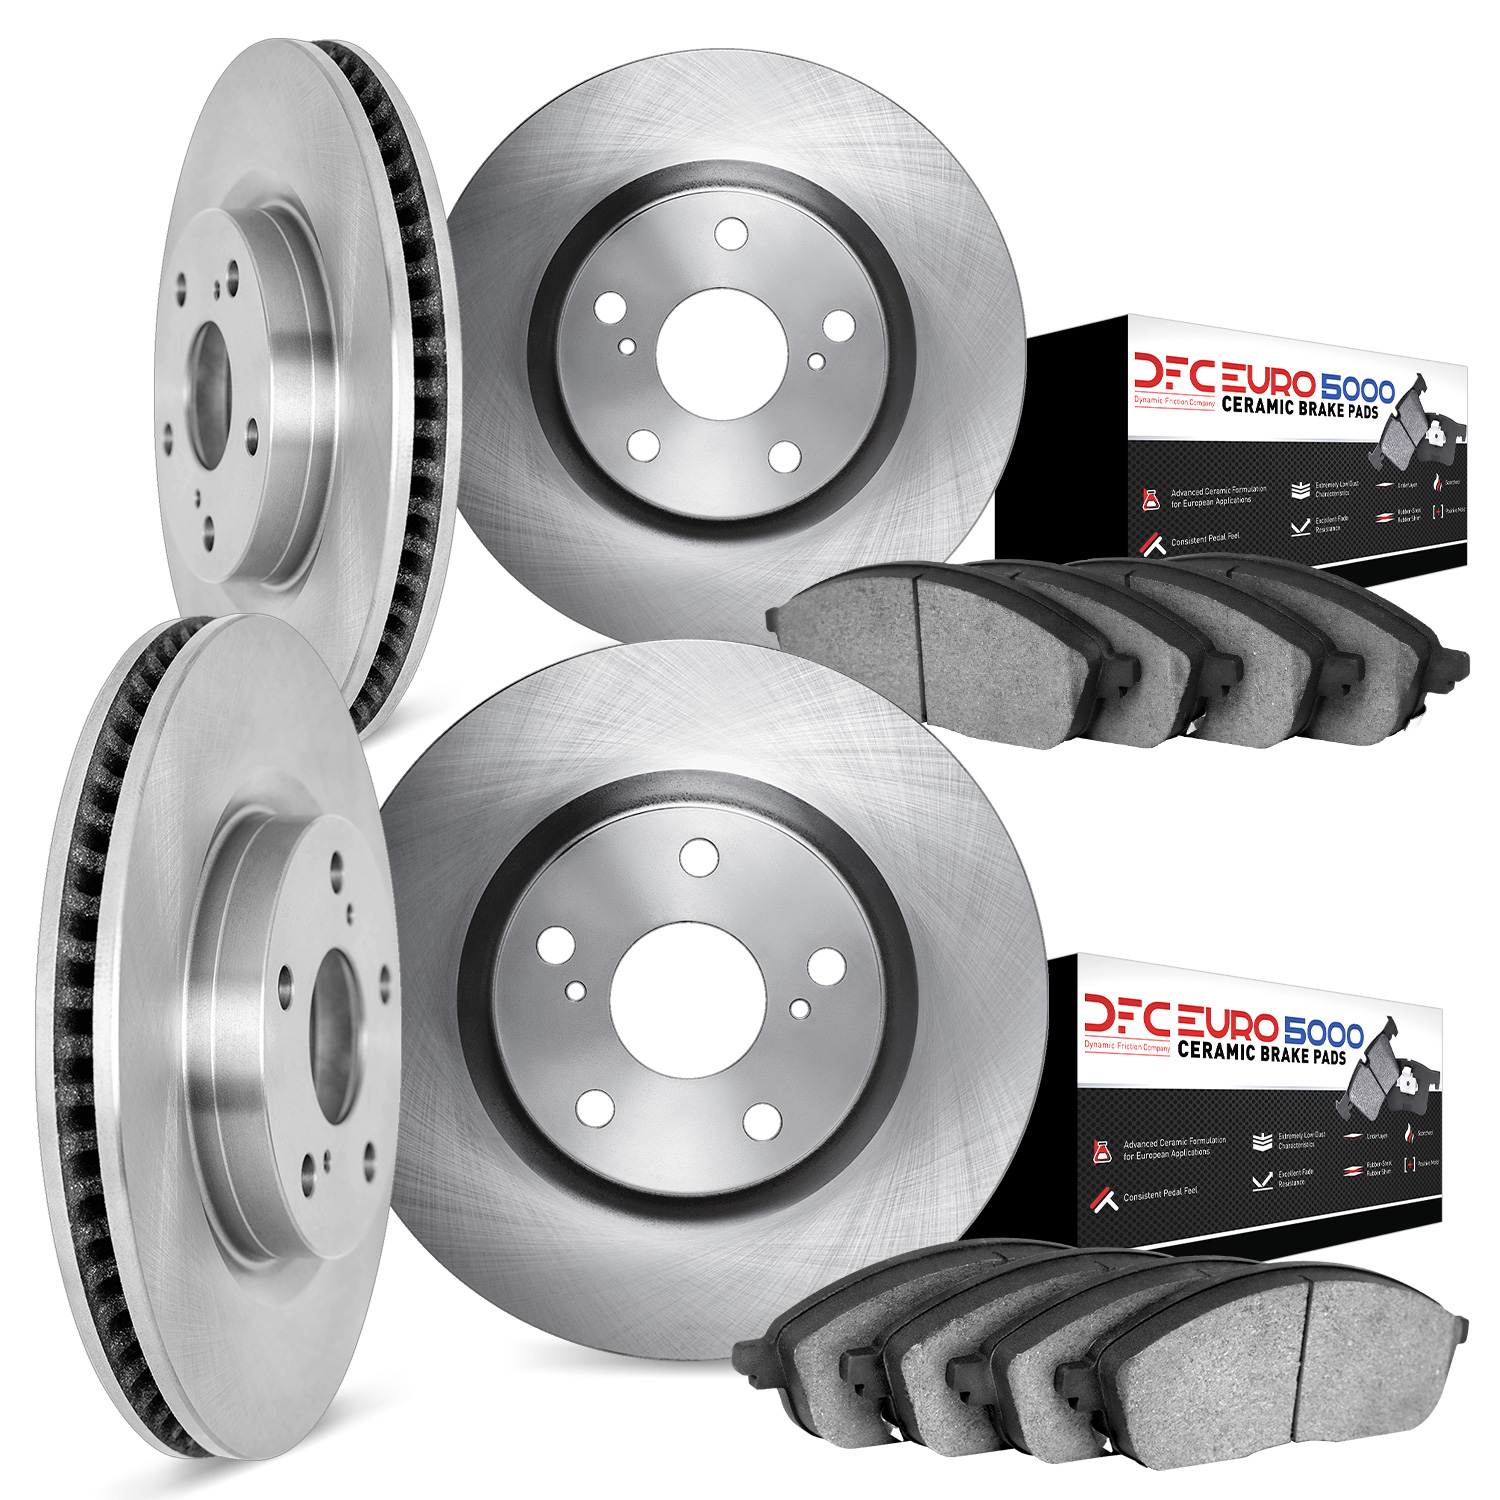 6604-11427 Brake Rotors w/5000 Euro Ceramic Brake Pads, 2008-2018 Volvo, Position: Front and Rear